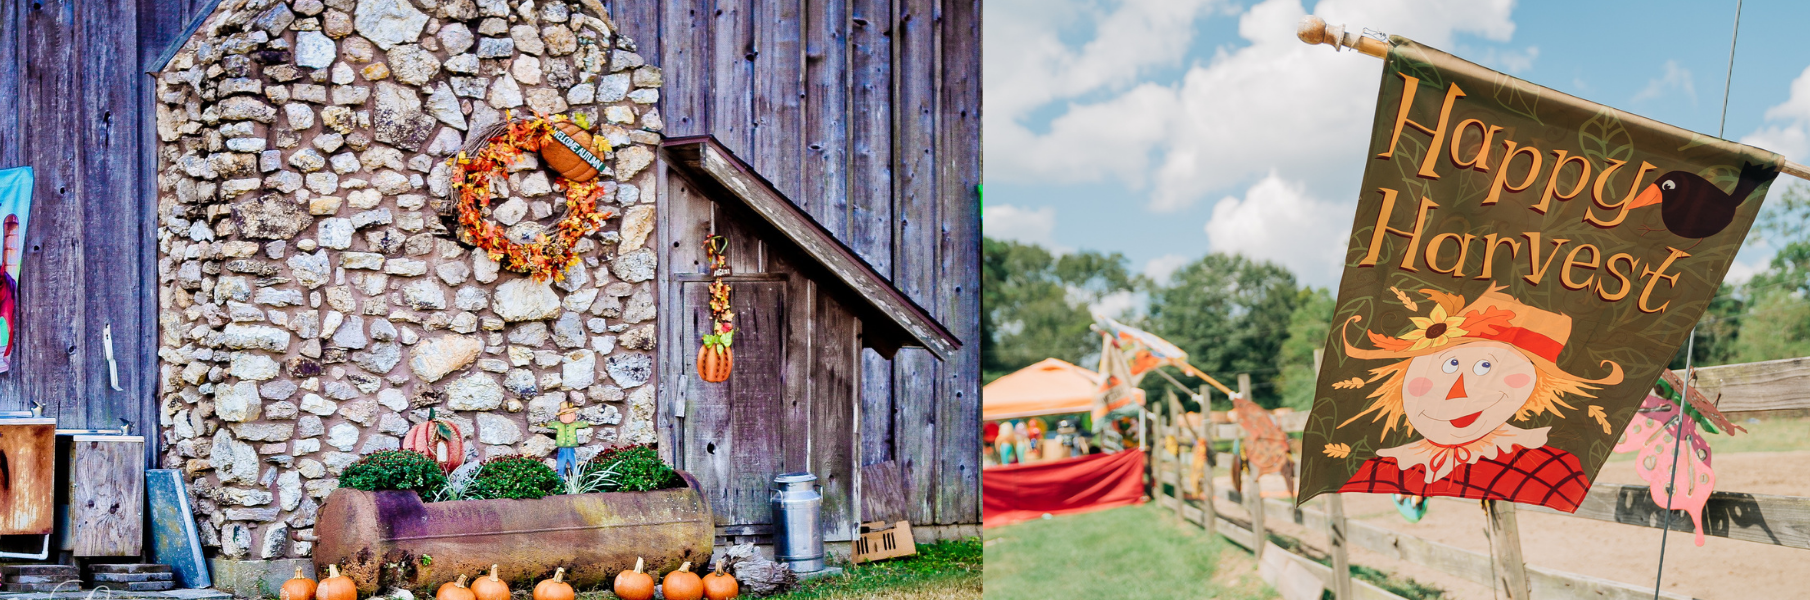 Farm exterior and happy harvest sign 